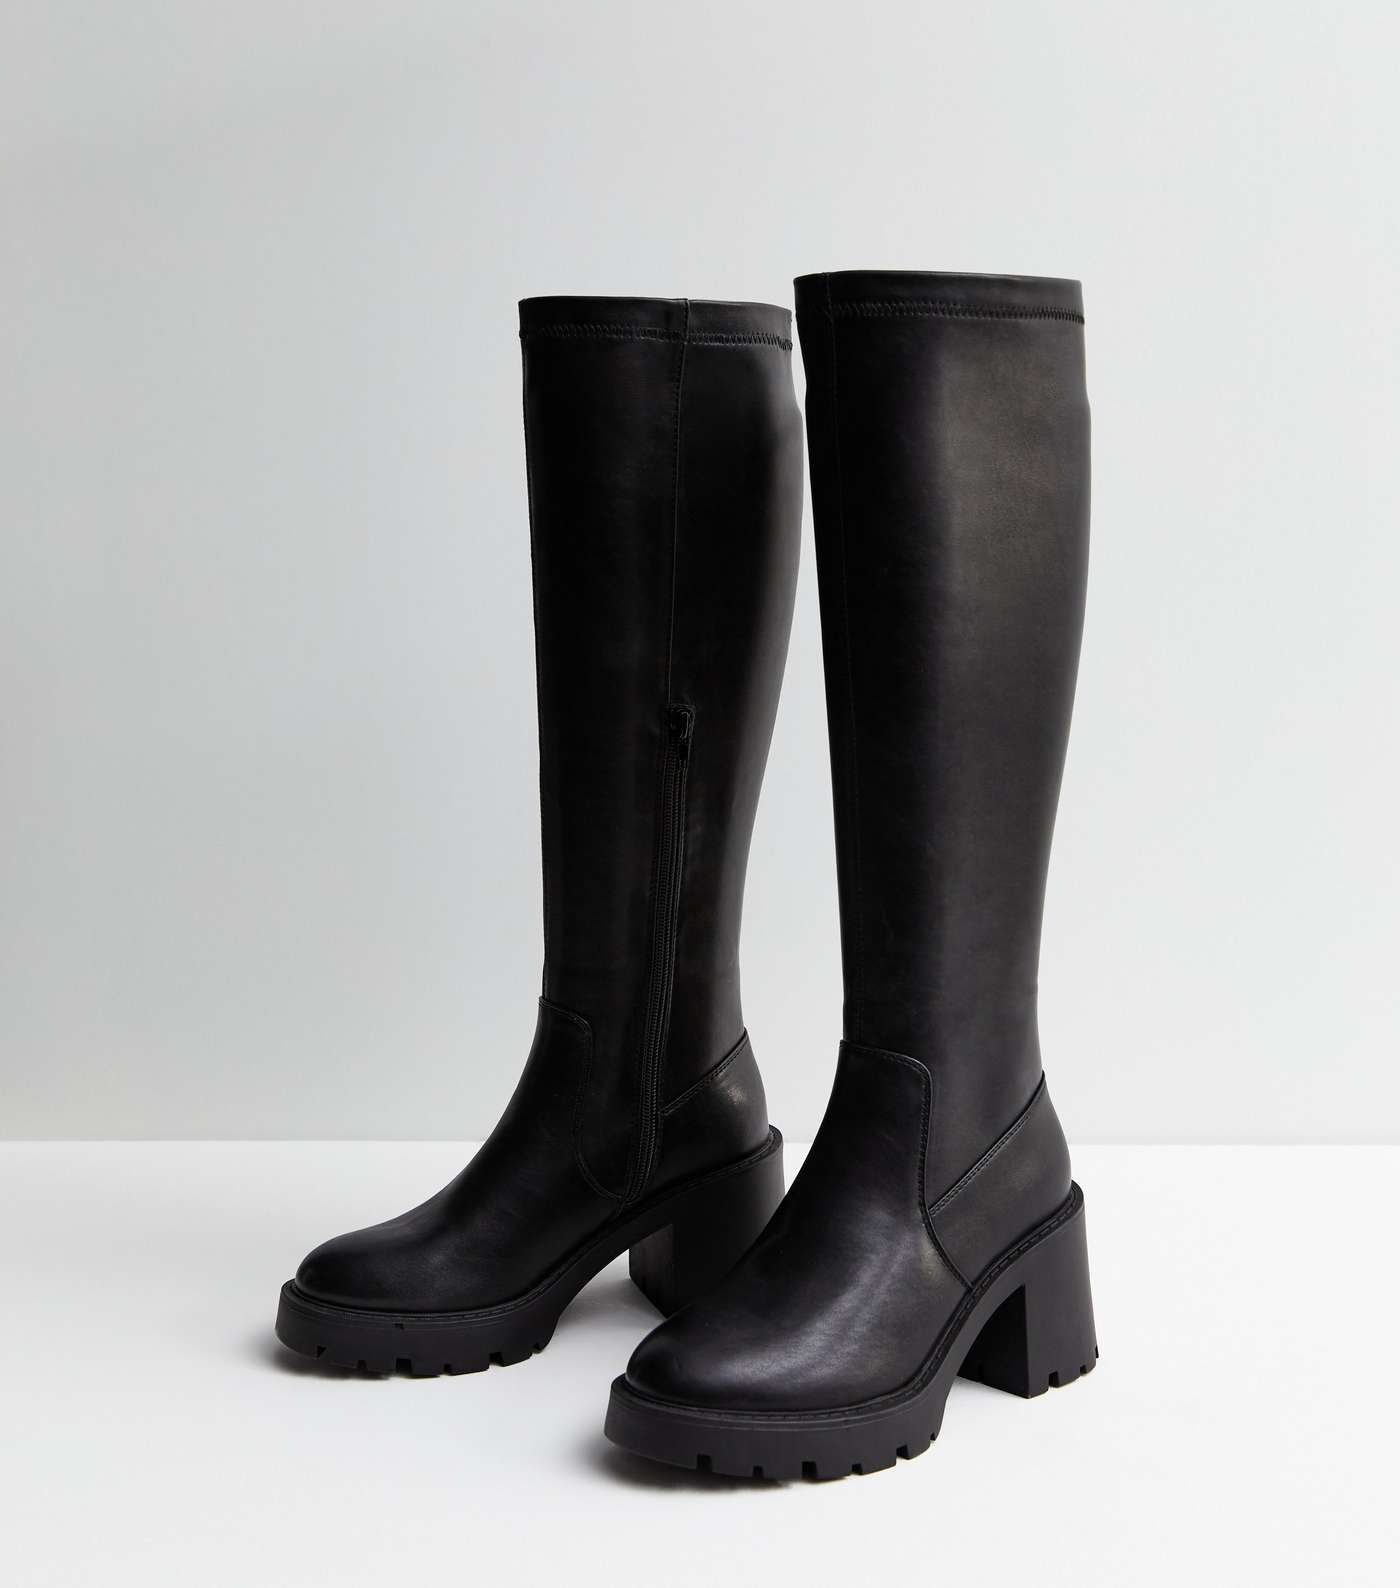 Black Leather-Look Stretch Block Heel Knee High Boots Image 2